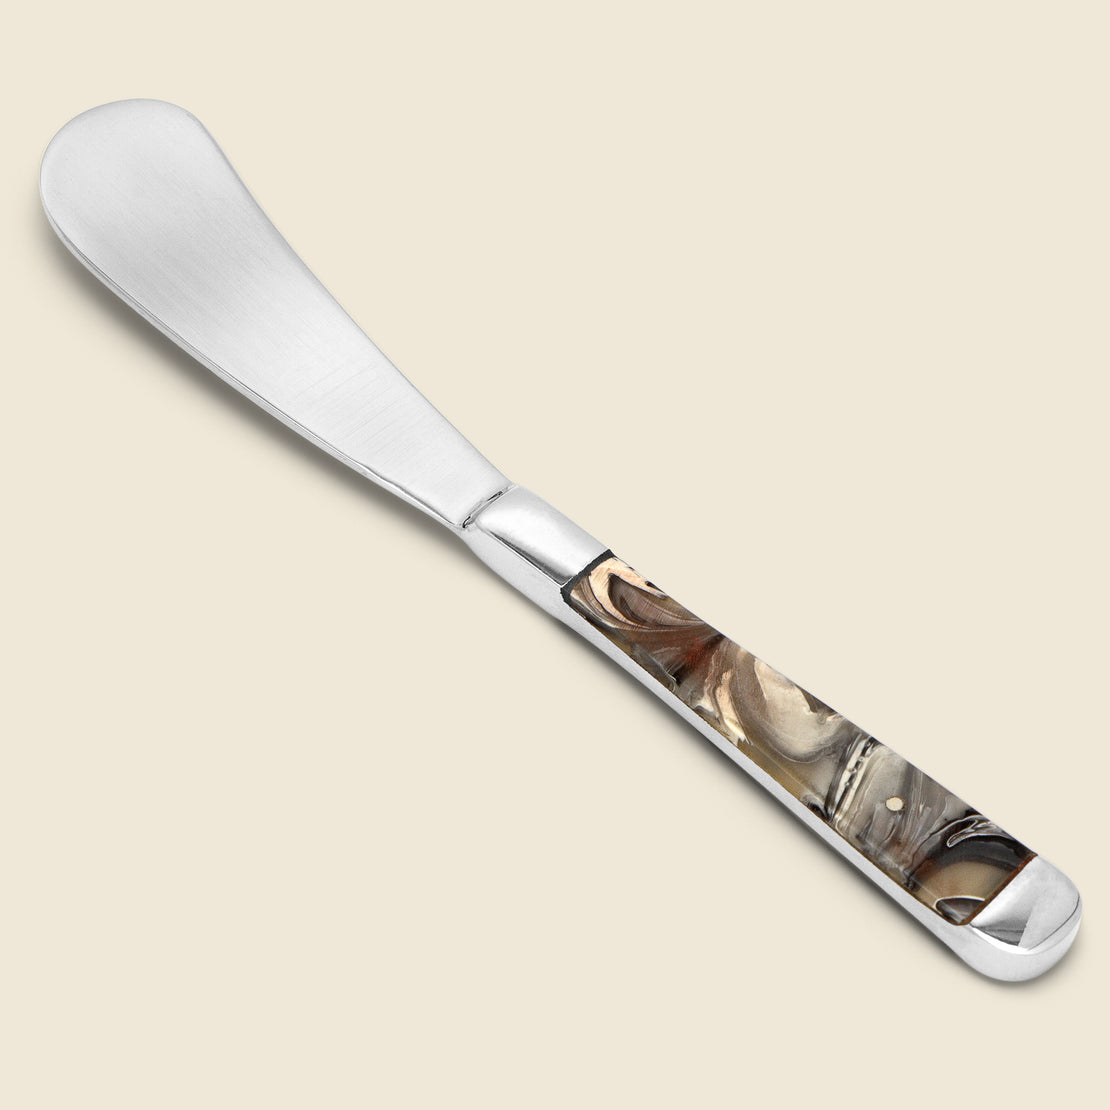 Horn Handled Cheese Knife - Home - STAG Provisions - Home - Kitchen - Tabletop